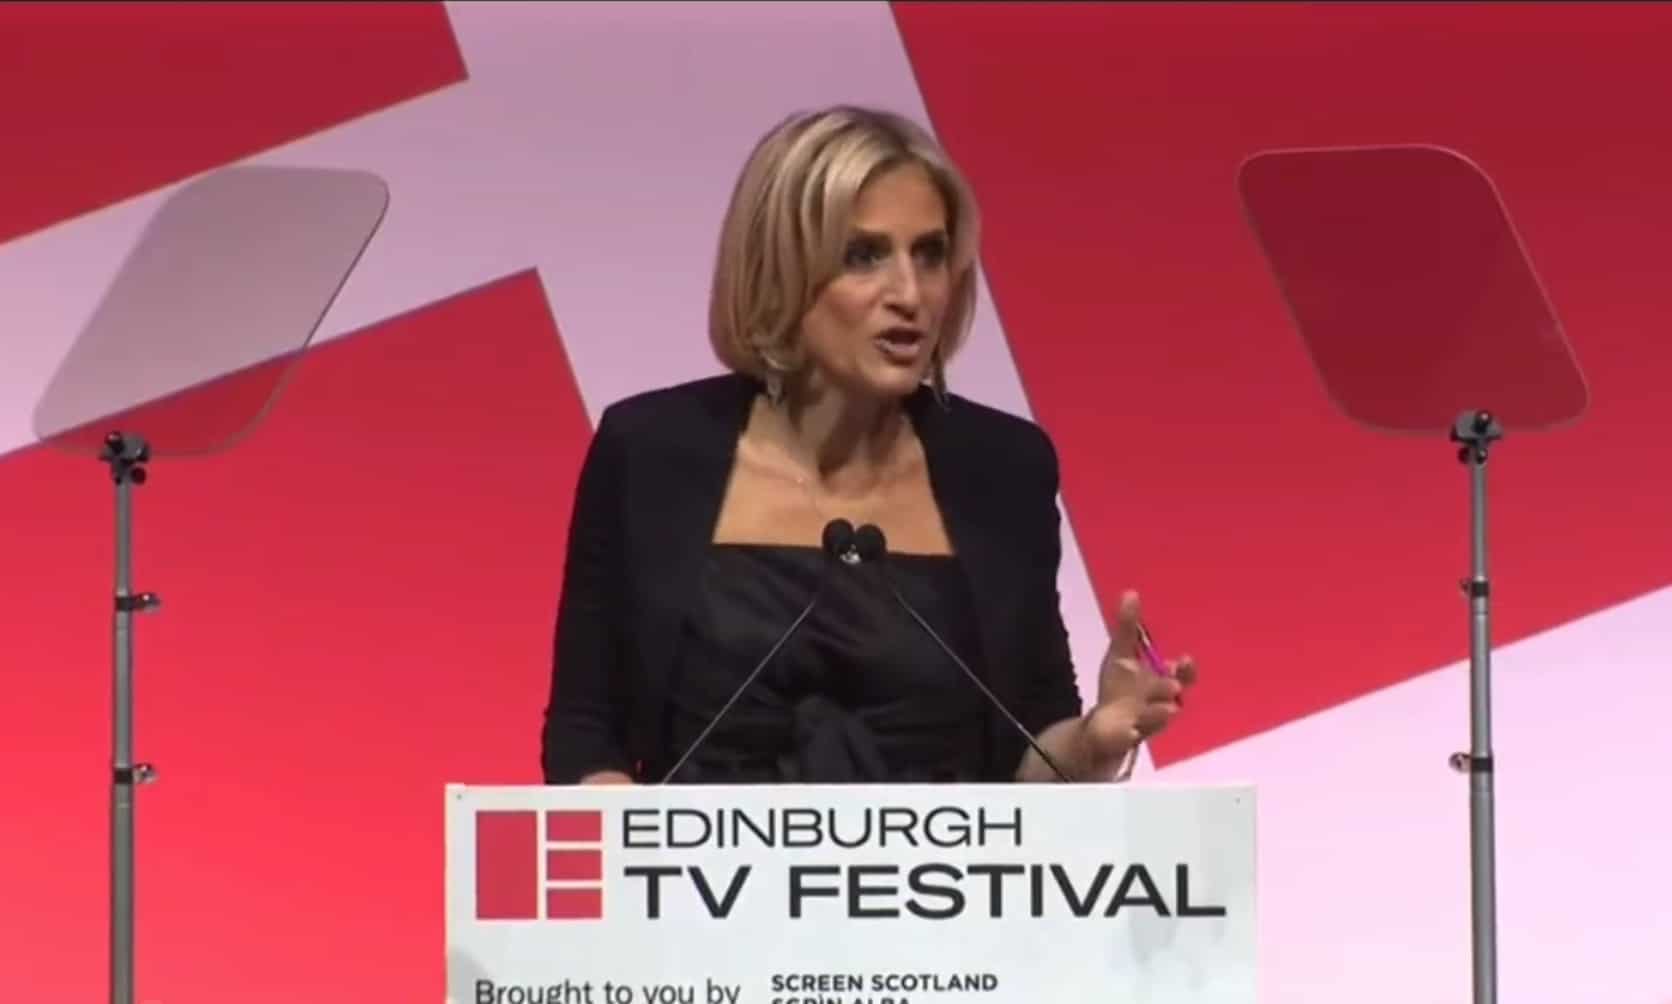 Media guilty of ‘normalising’ populist views in the name of balance – Maitlis